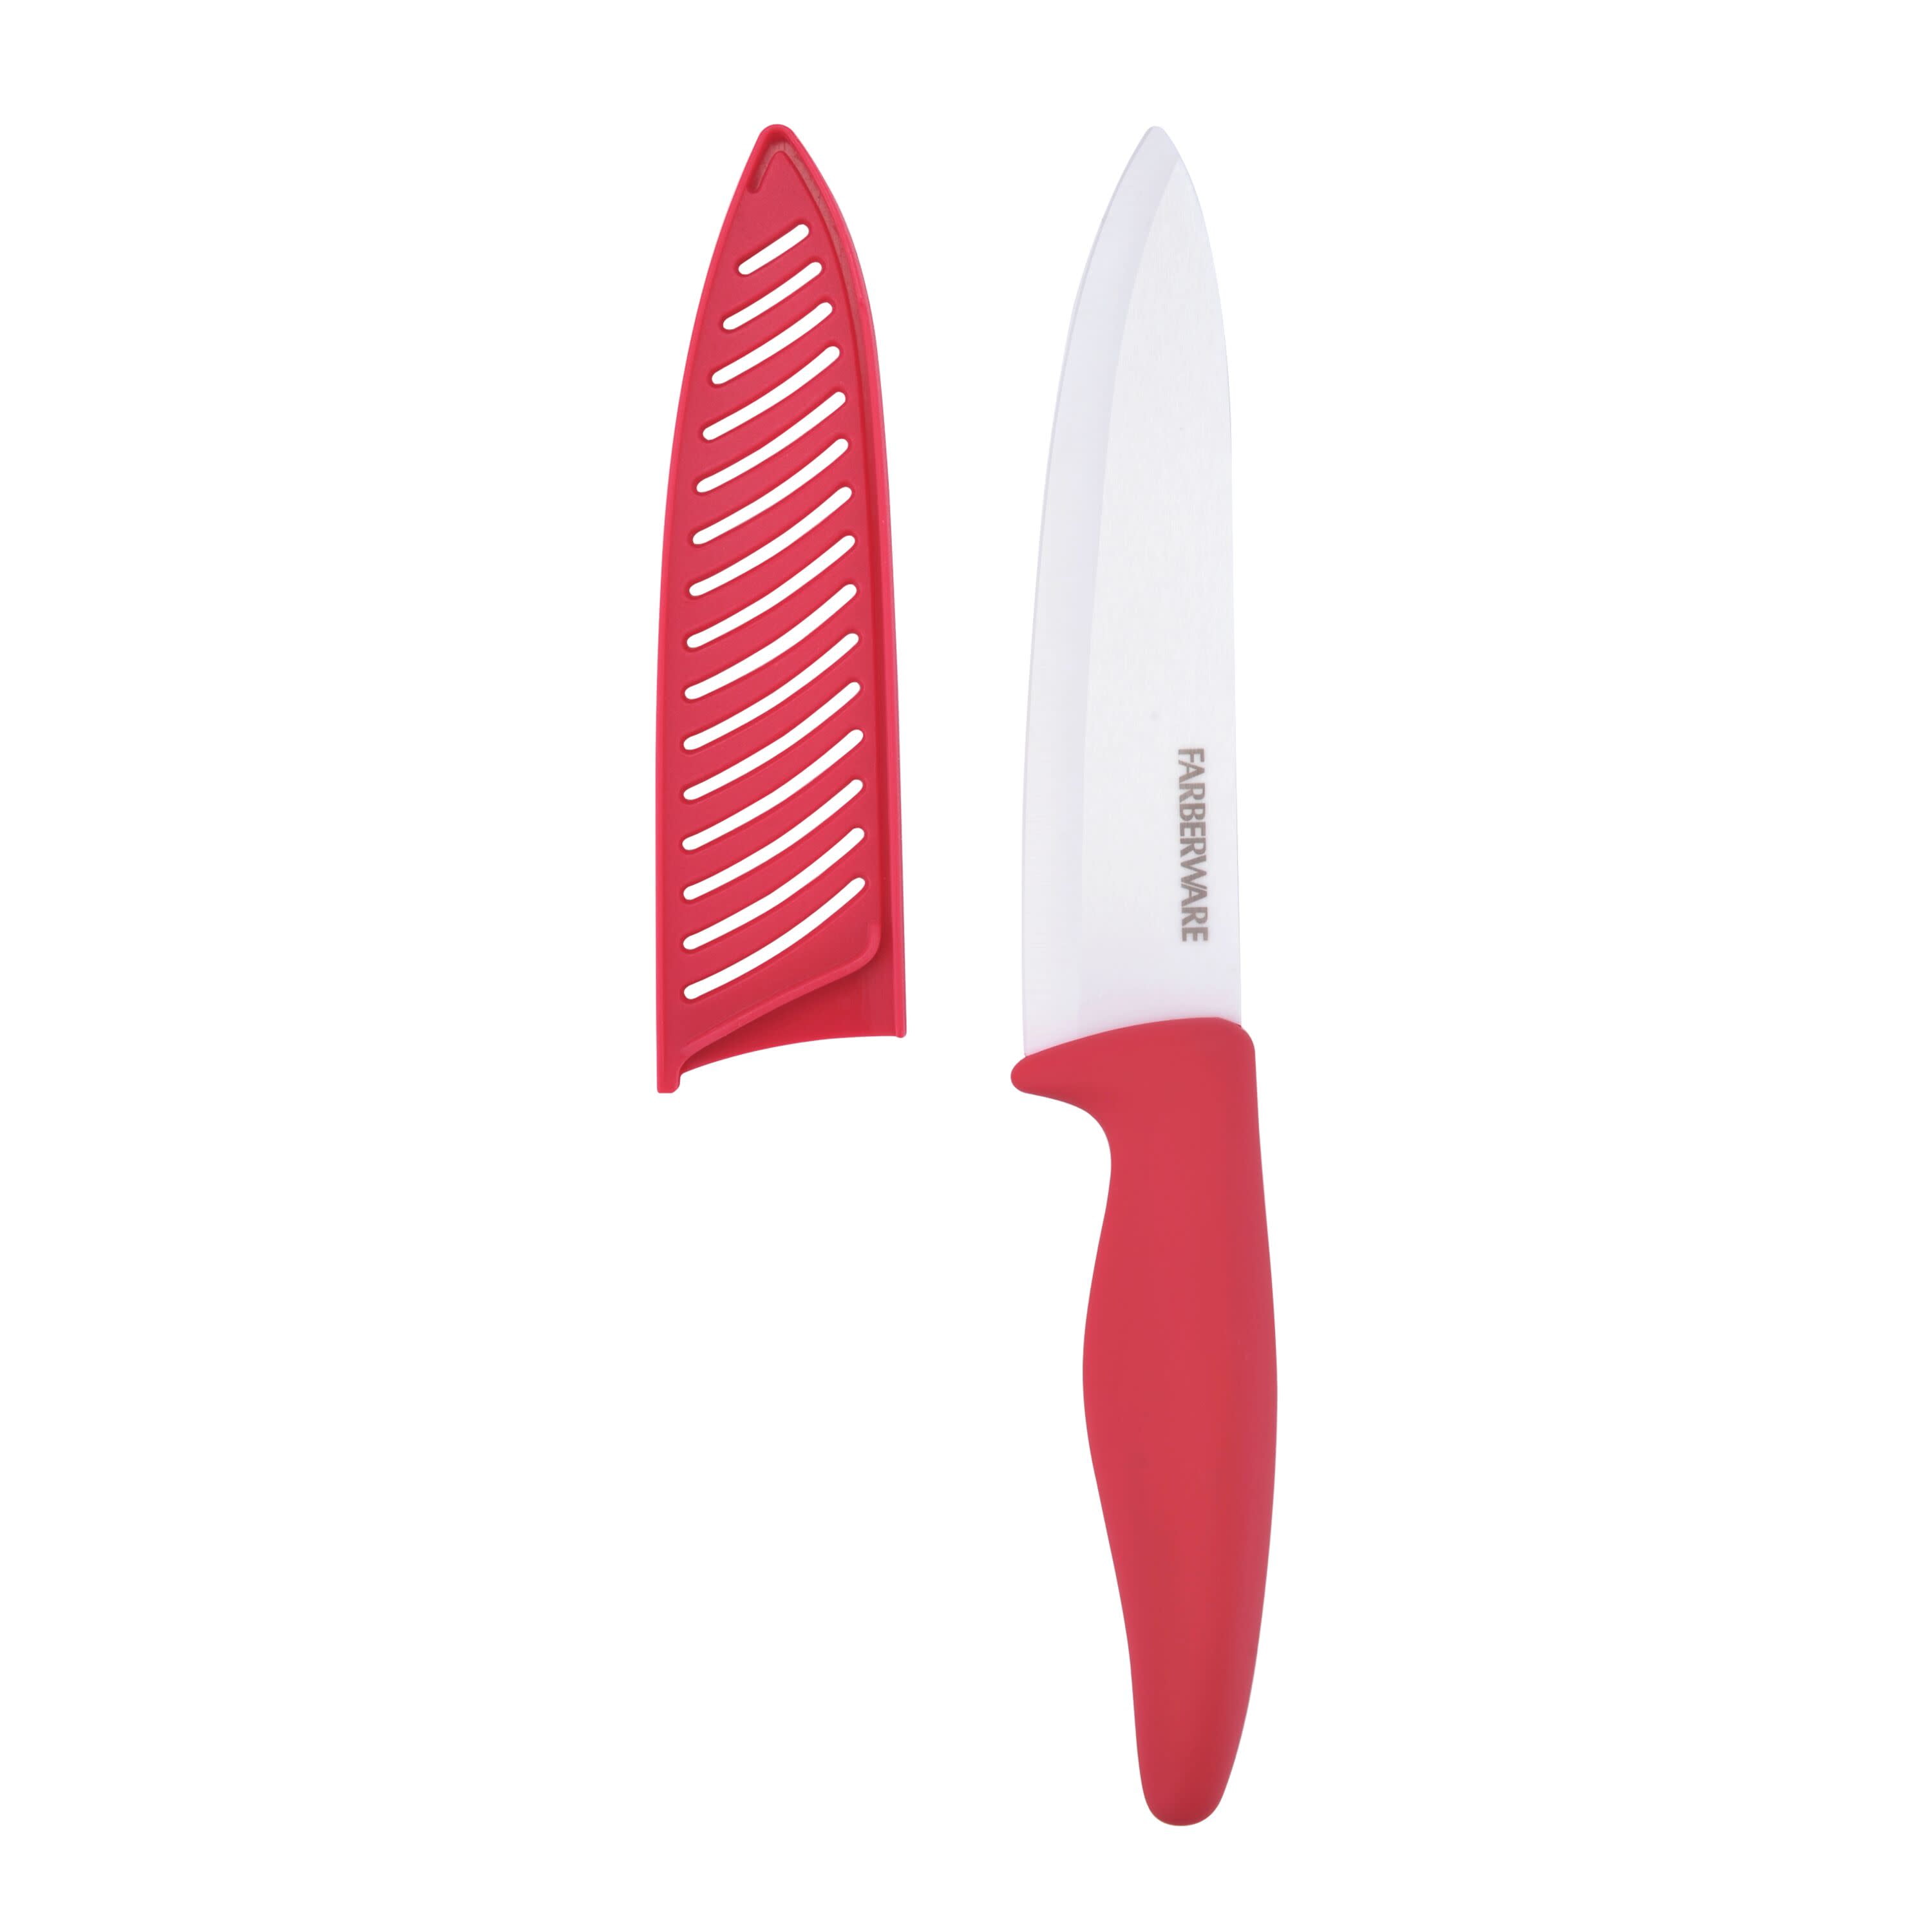 Ceramic Knives Set with Covers - 6 Pcs - Red